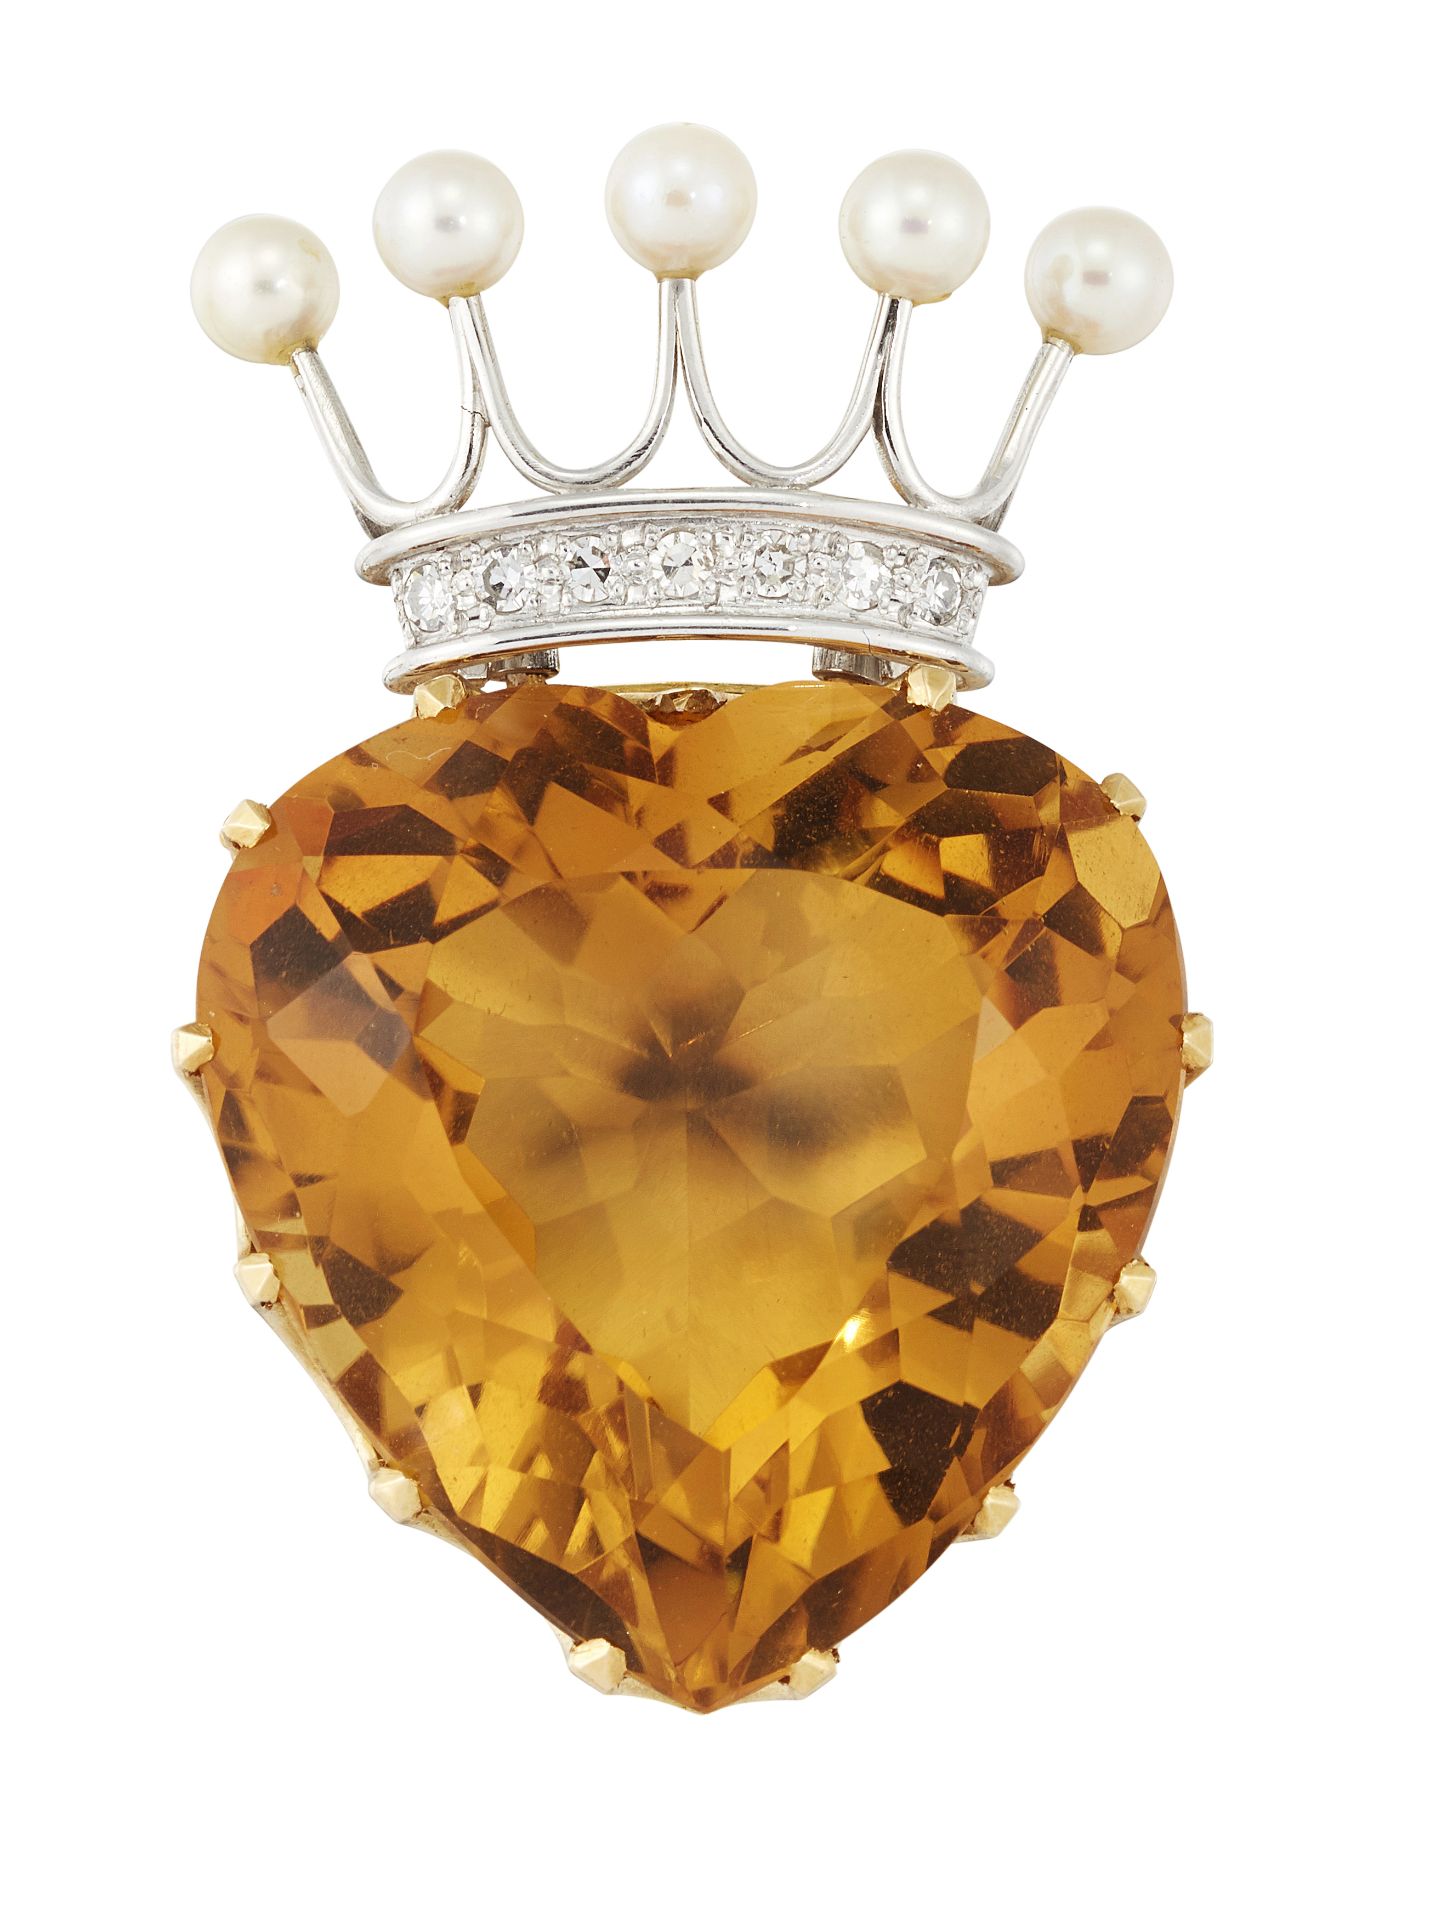 A 9CT CITRINE, DIAMOND CULTURED PEARL HEART AND CROWN BROOCH